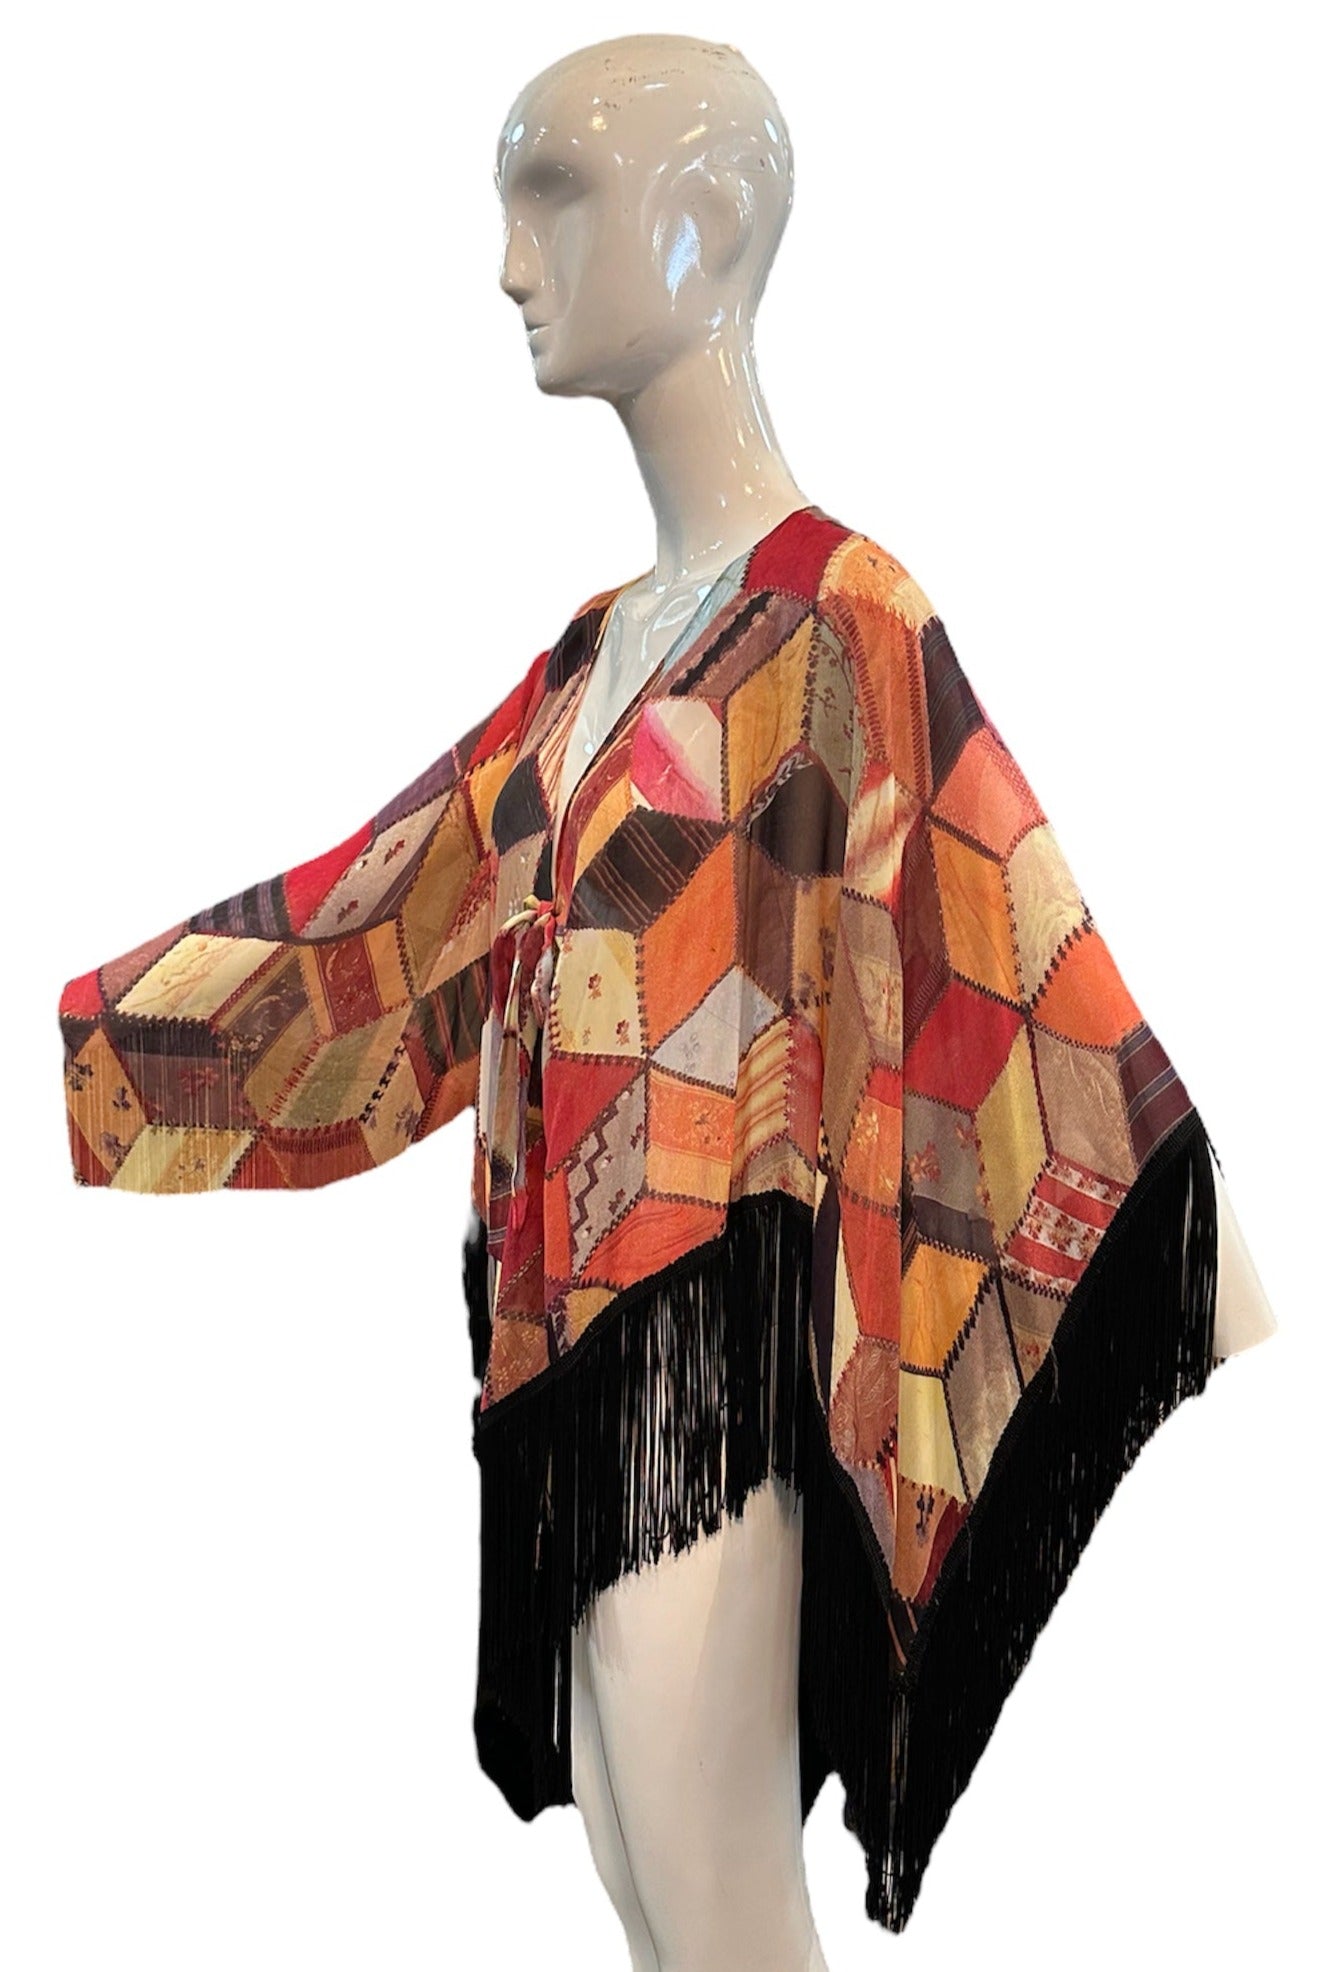  Moschino Cheap and Chic 1990s Mesh Trompe L'oeil Crazy Quilt Patchwork Fringed Shawl SIDE 2 of 5